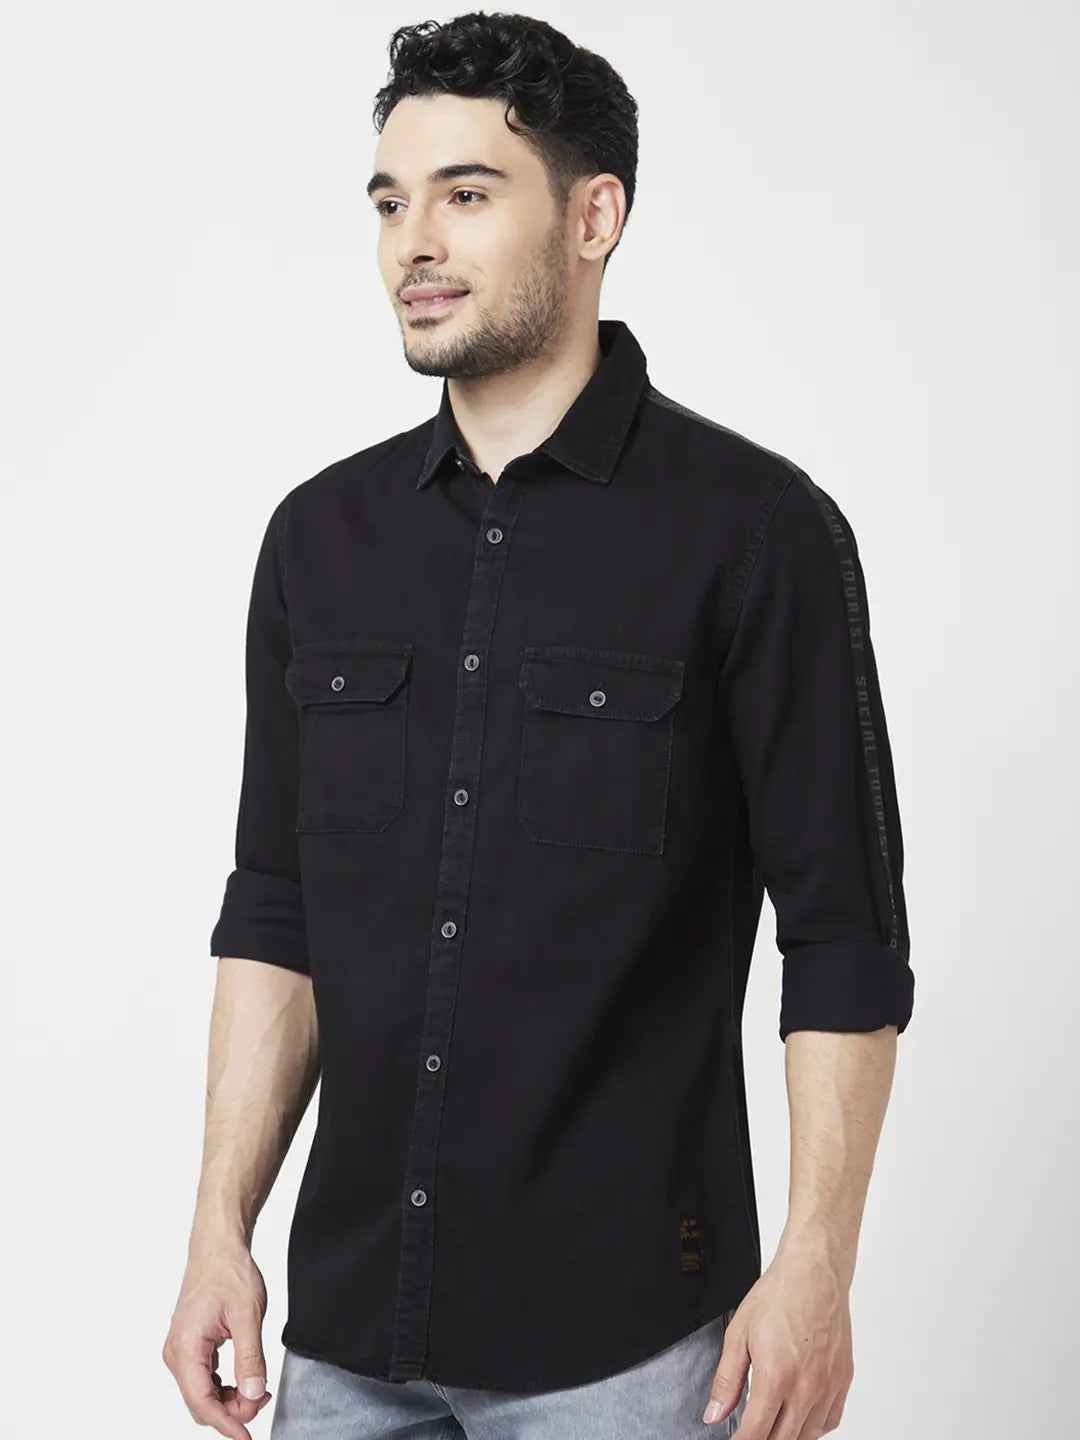 Buy L Size Denim Shirts for Men online in India at Best Price